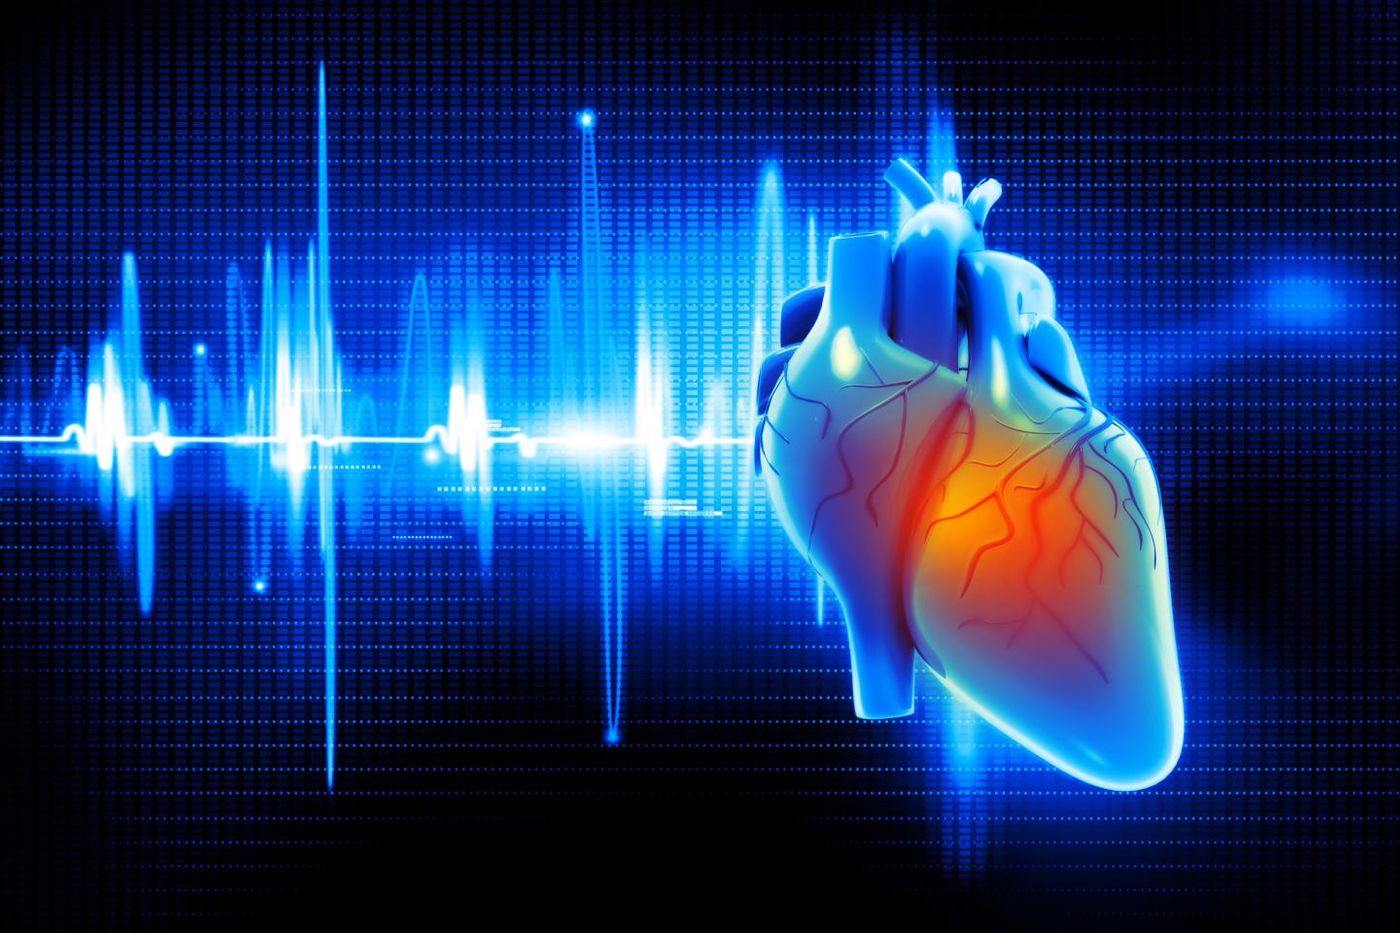 Researchers have identified a microRNA biomarker that demonstrates a strong association with the incidence of atrial fibrillation, the most common abnormal heart rhythm. Intermountain Medical Center Heart Institute